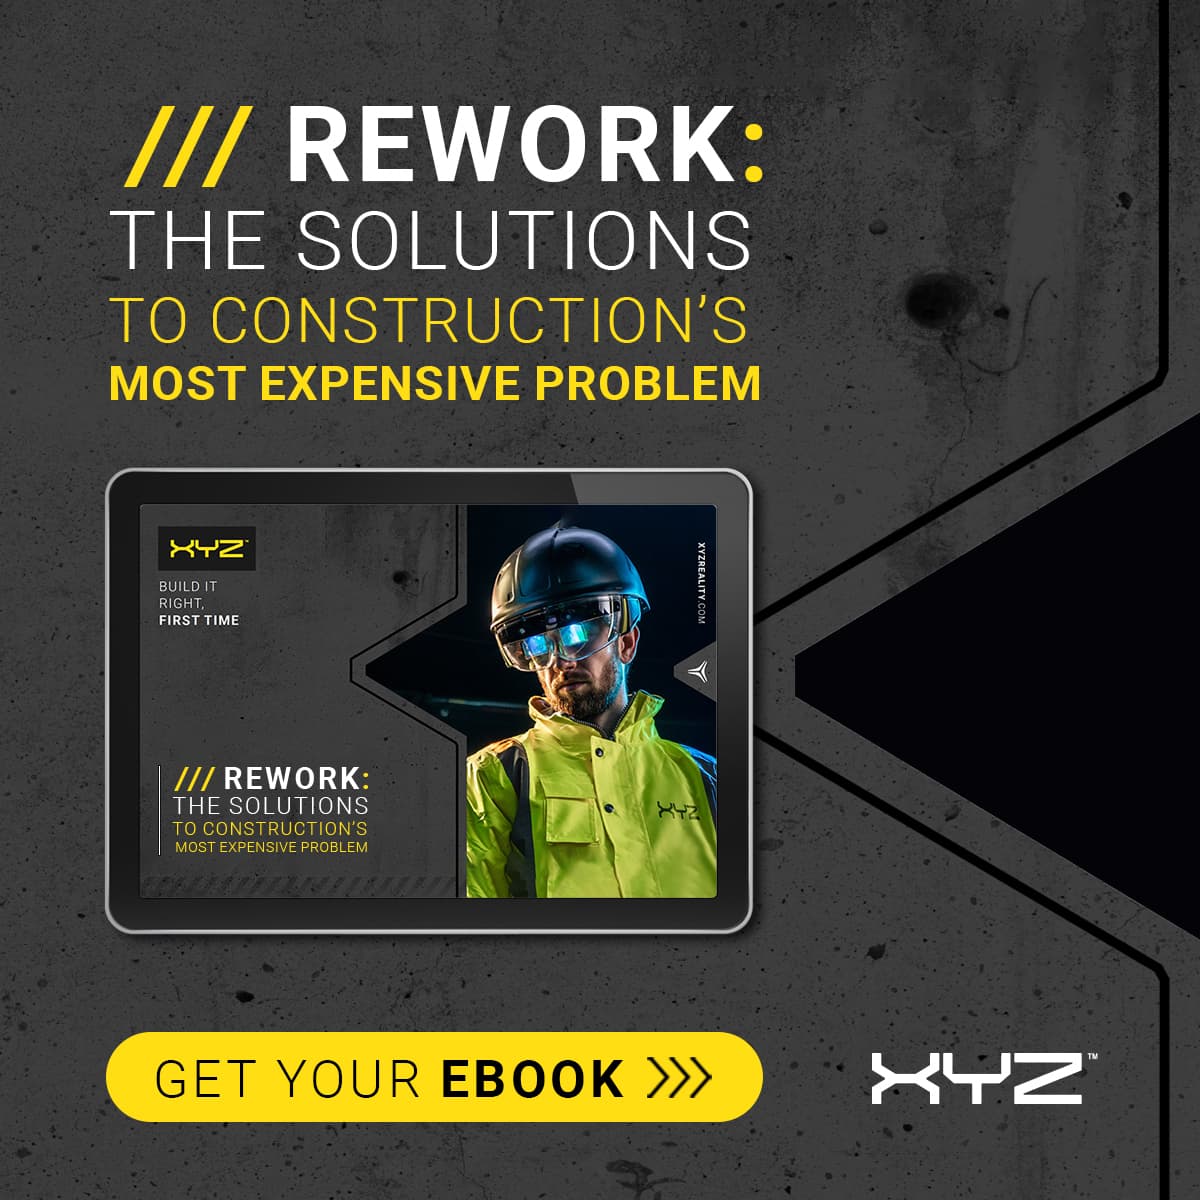 eBook: Root causes of rework - download now